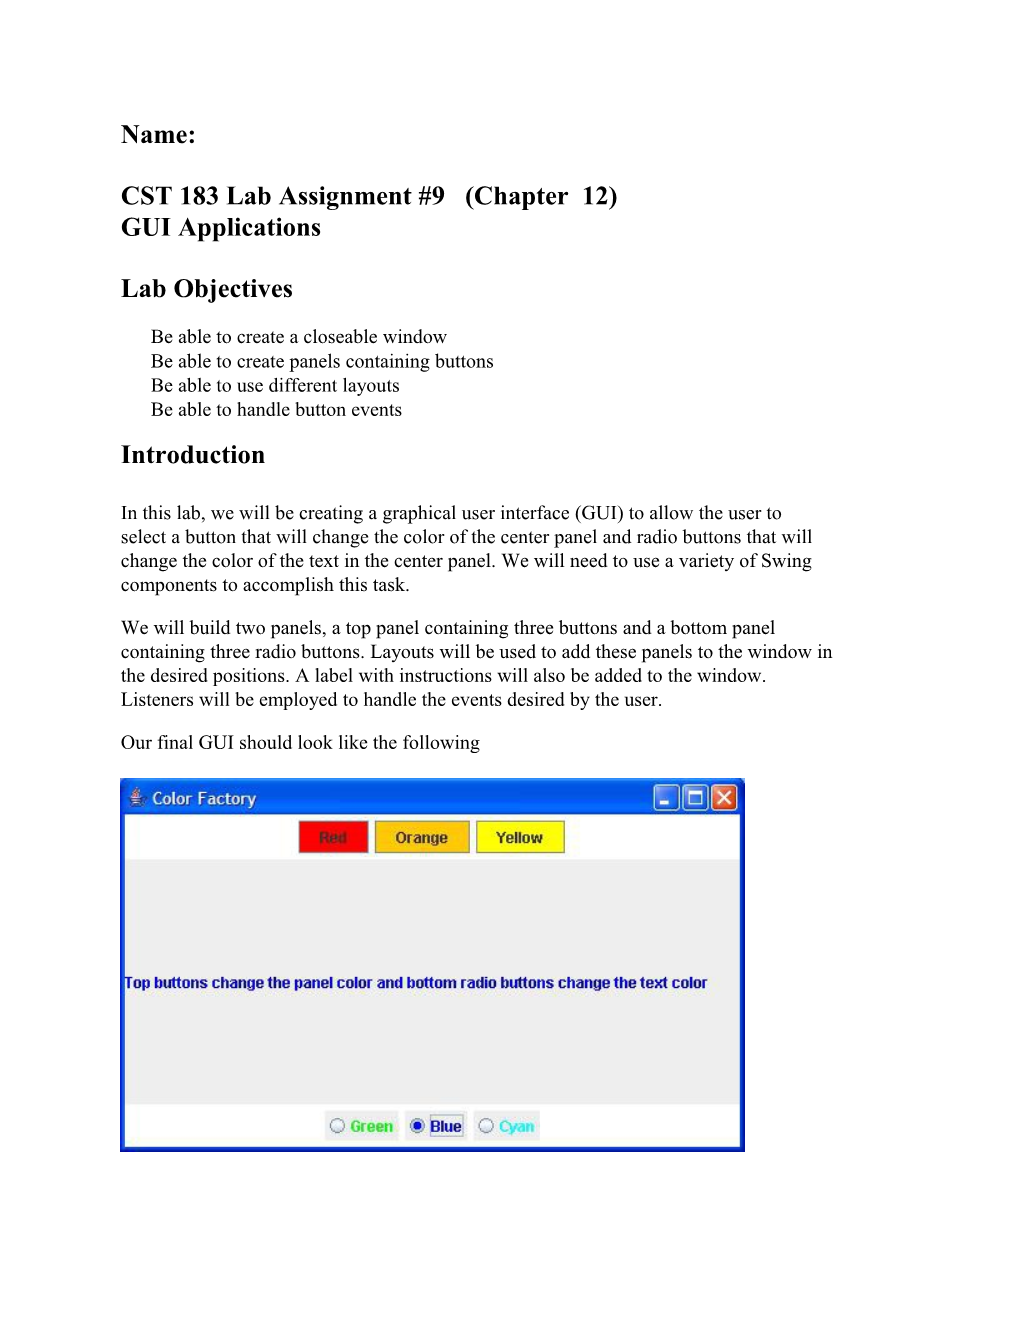 CST 183 Lab Assignment #9 (Chapter 12)